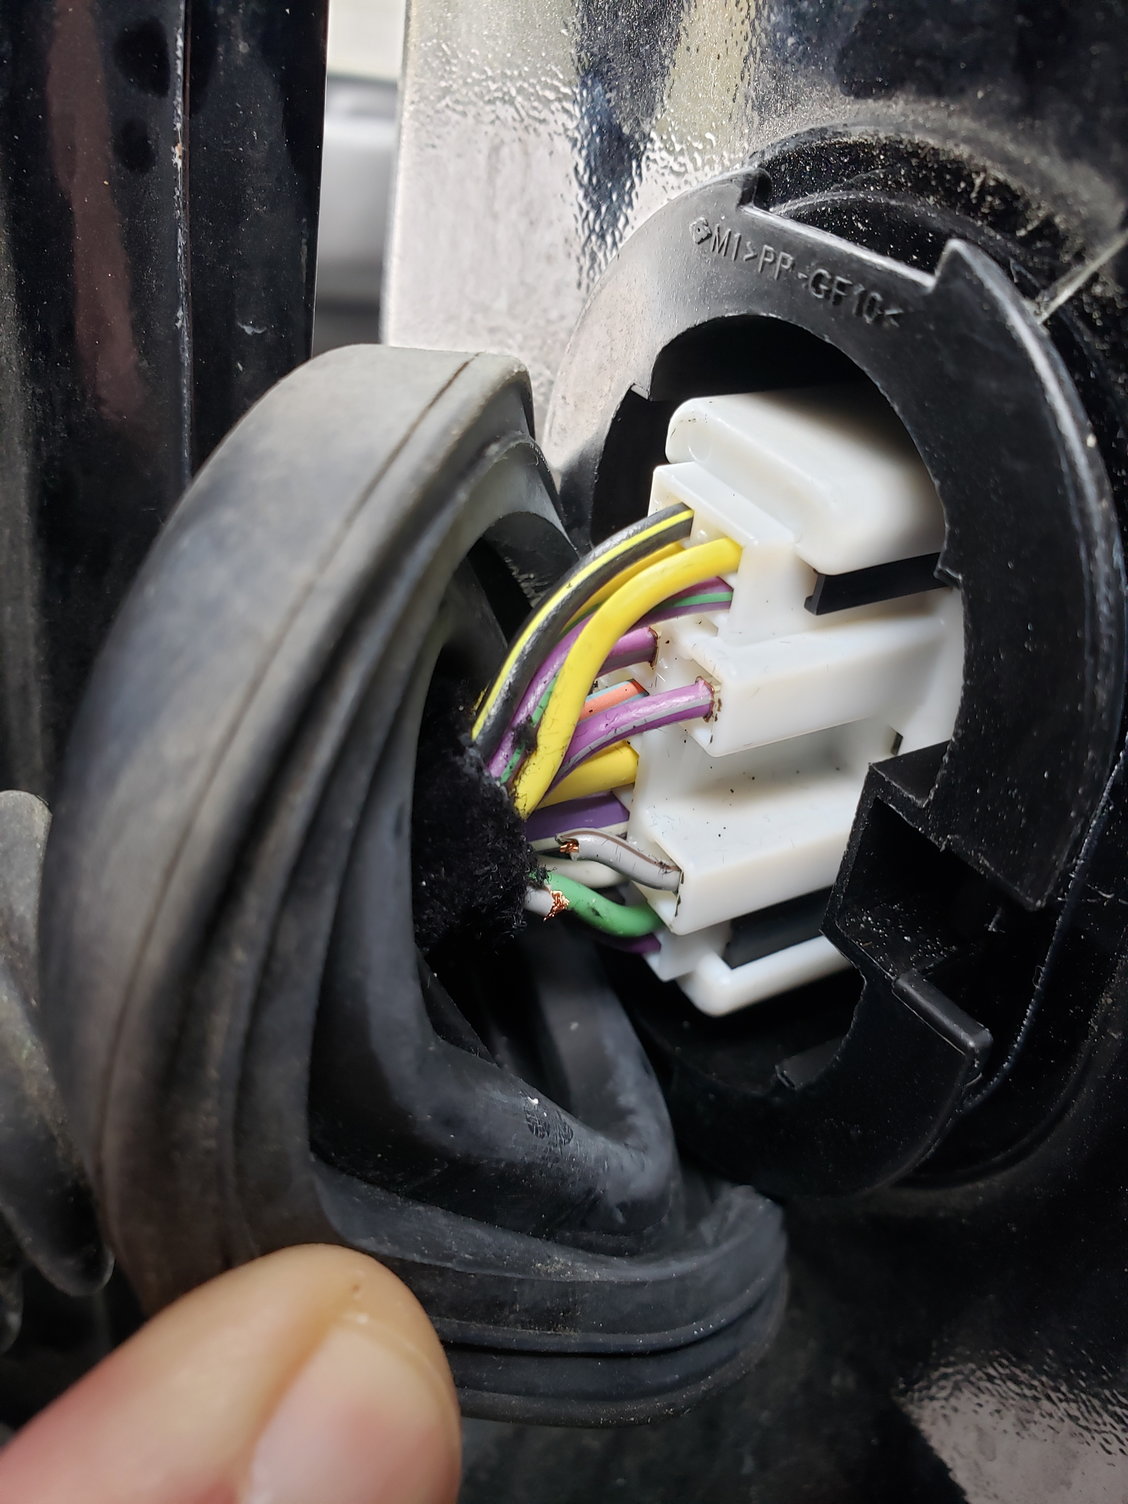 Left Rear Door Wiring - Ford F150 Forum - Community of Ford Truck Fans 2011 Ford F150 Rear Door Wiring Harness Replacement